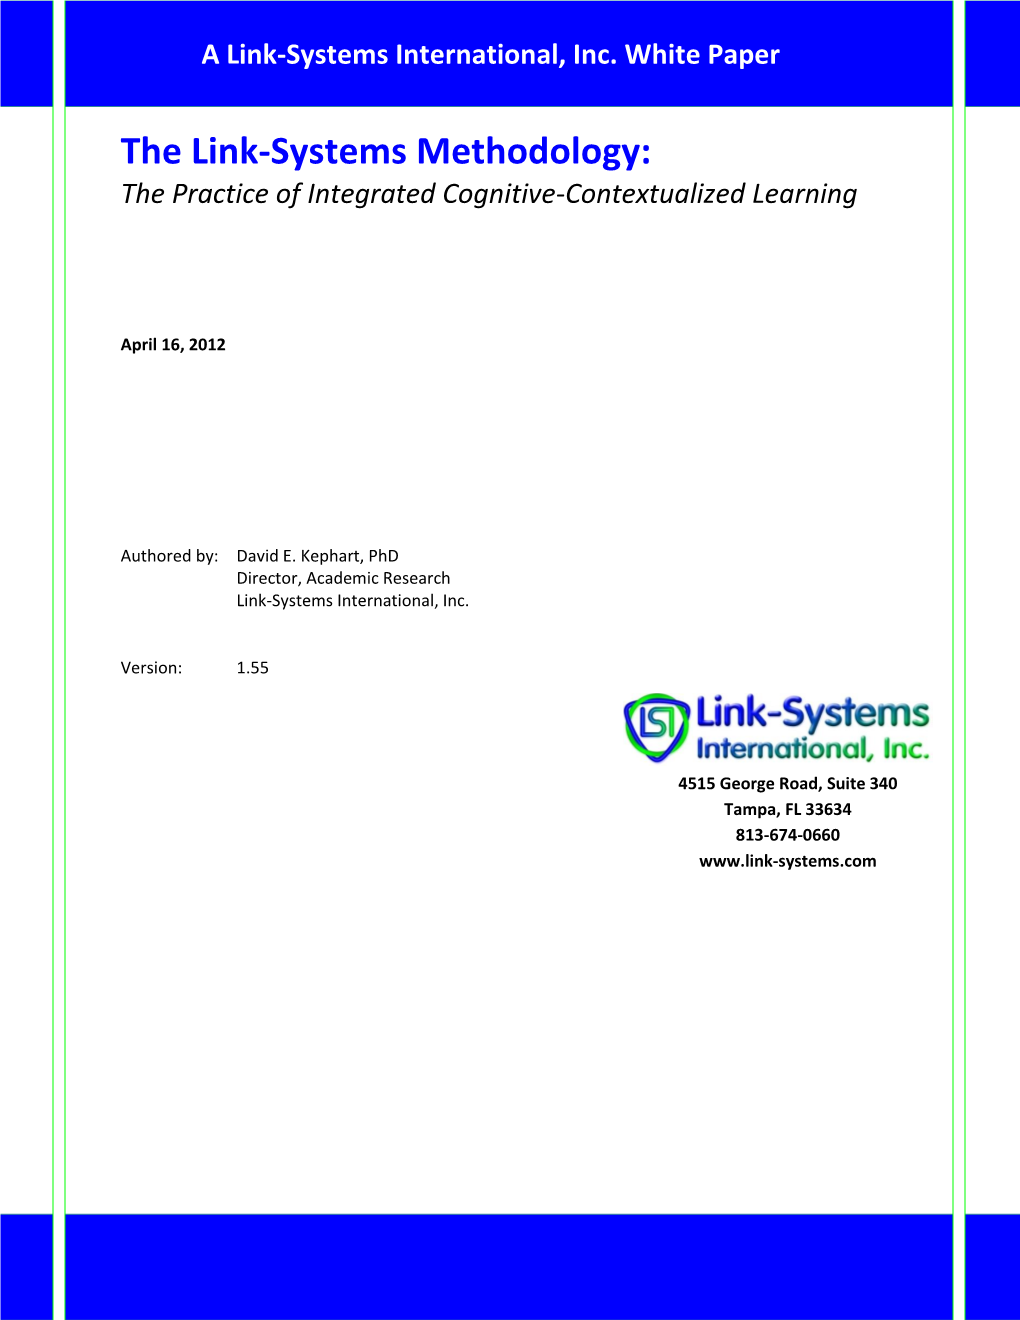 The Practice of Integrated Cognitive-Contextualized Learning